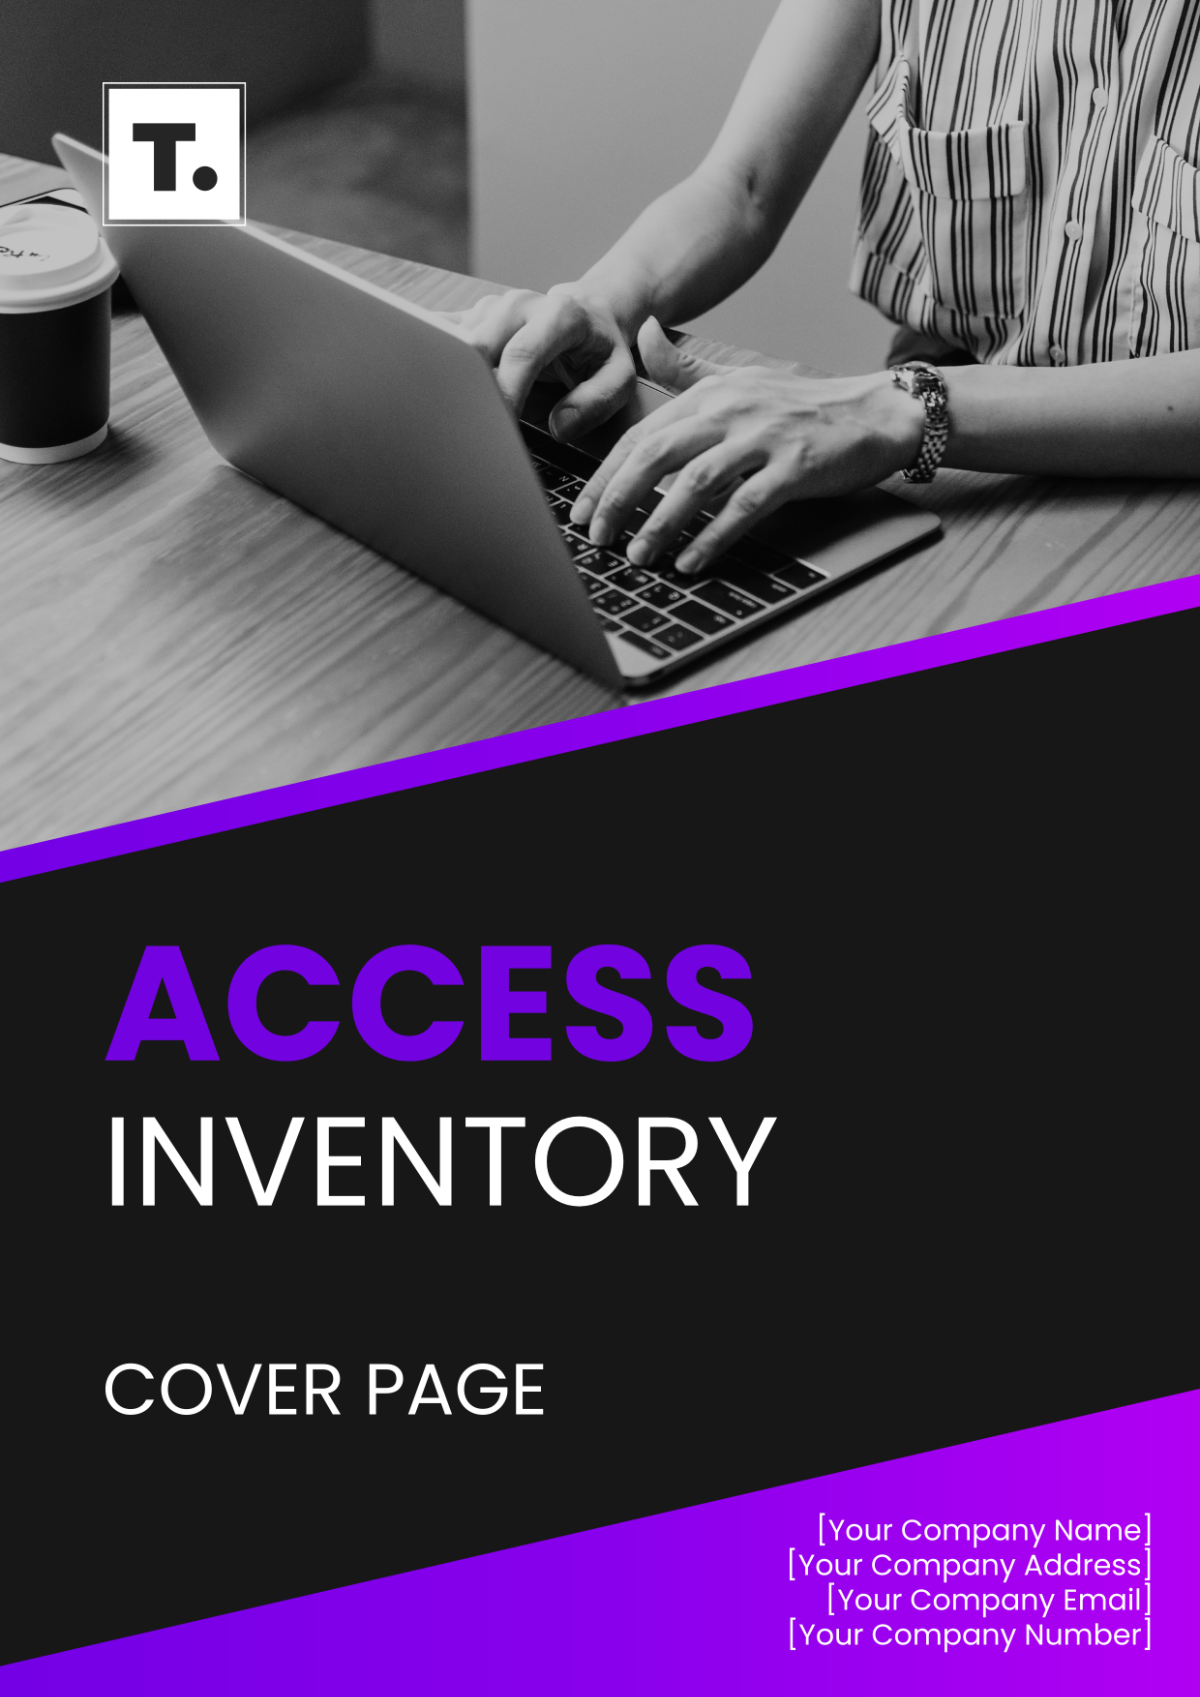 Access Inventory Cover Page